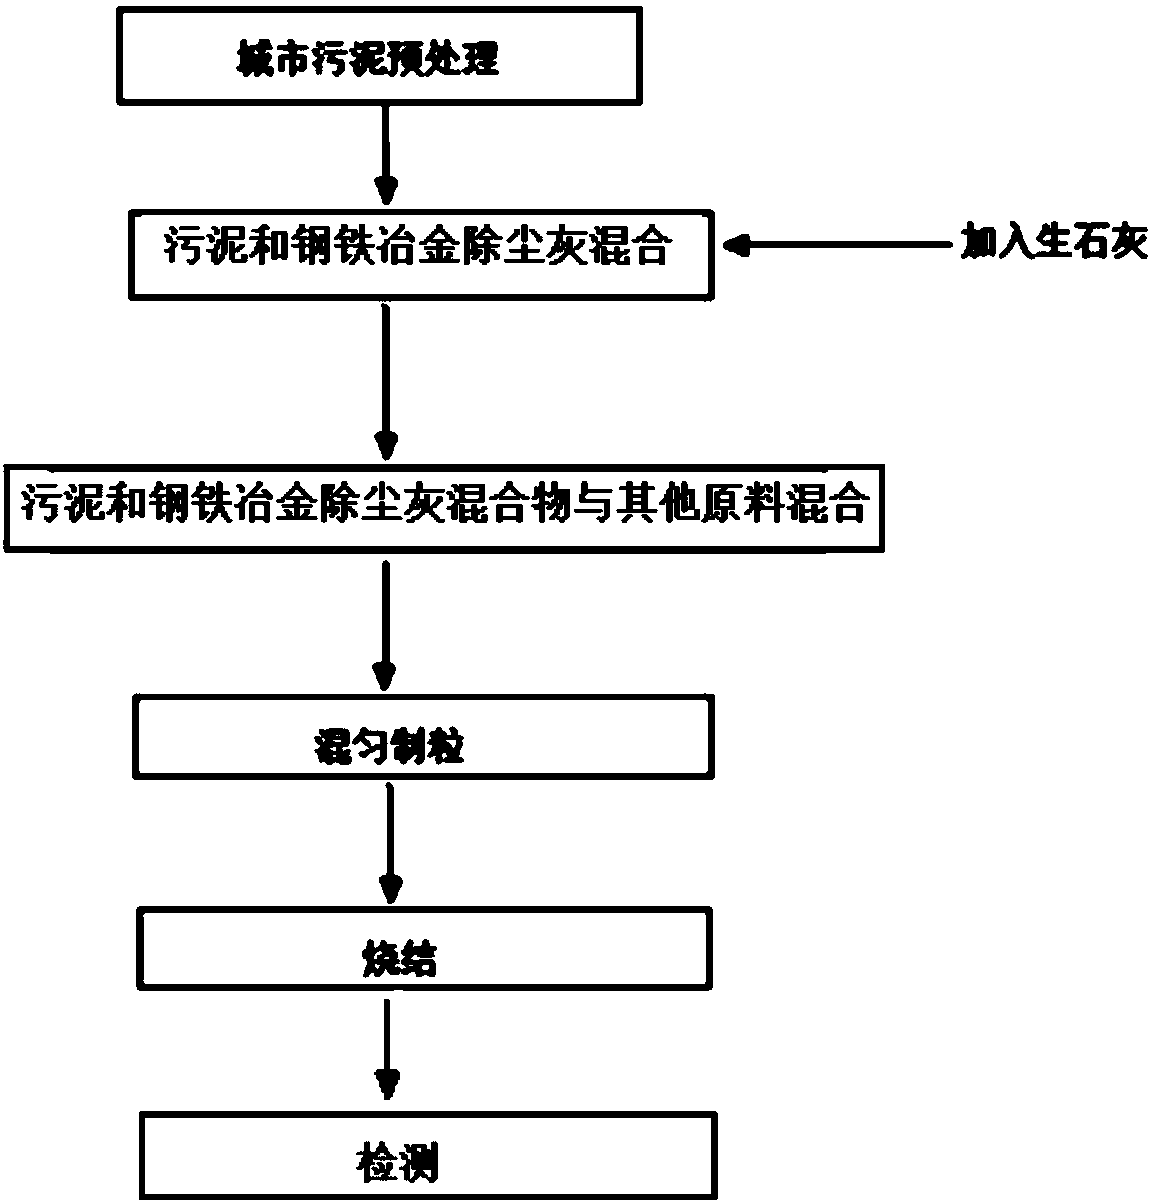 Method for sludge treating and ferrous metallurgy dust removal through metallurgical sintering process